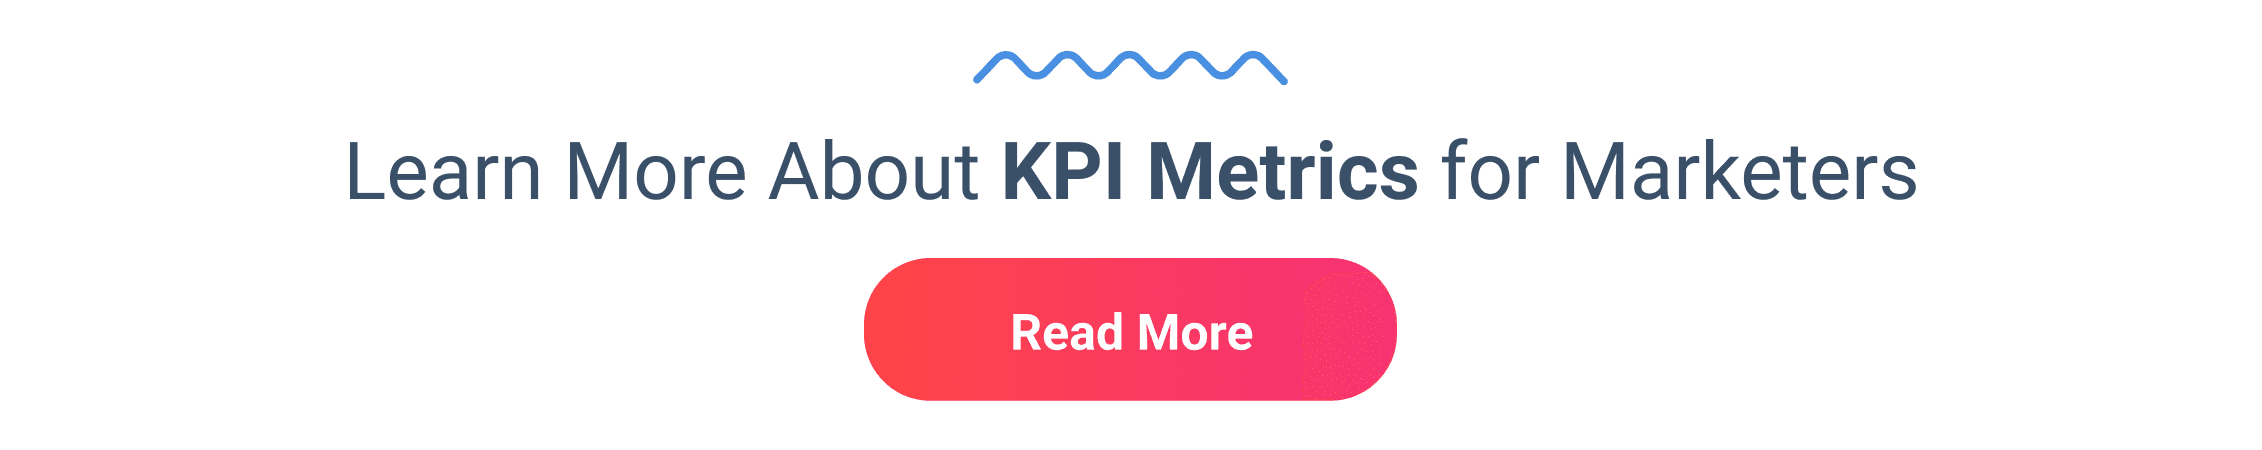 Learn more about KPI metrics for marketers banner